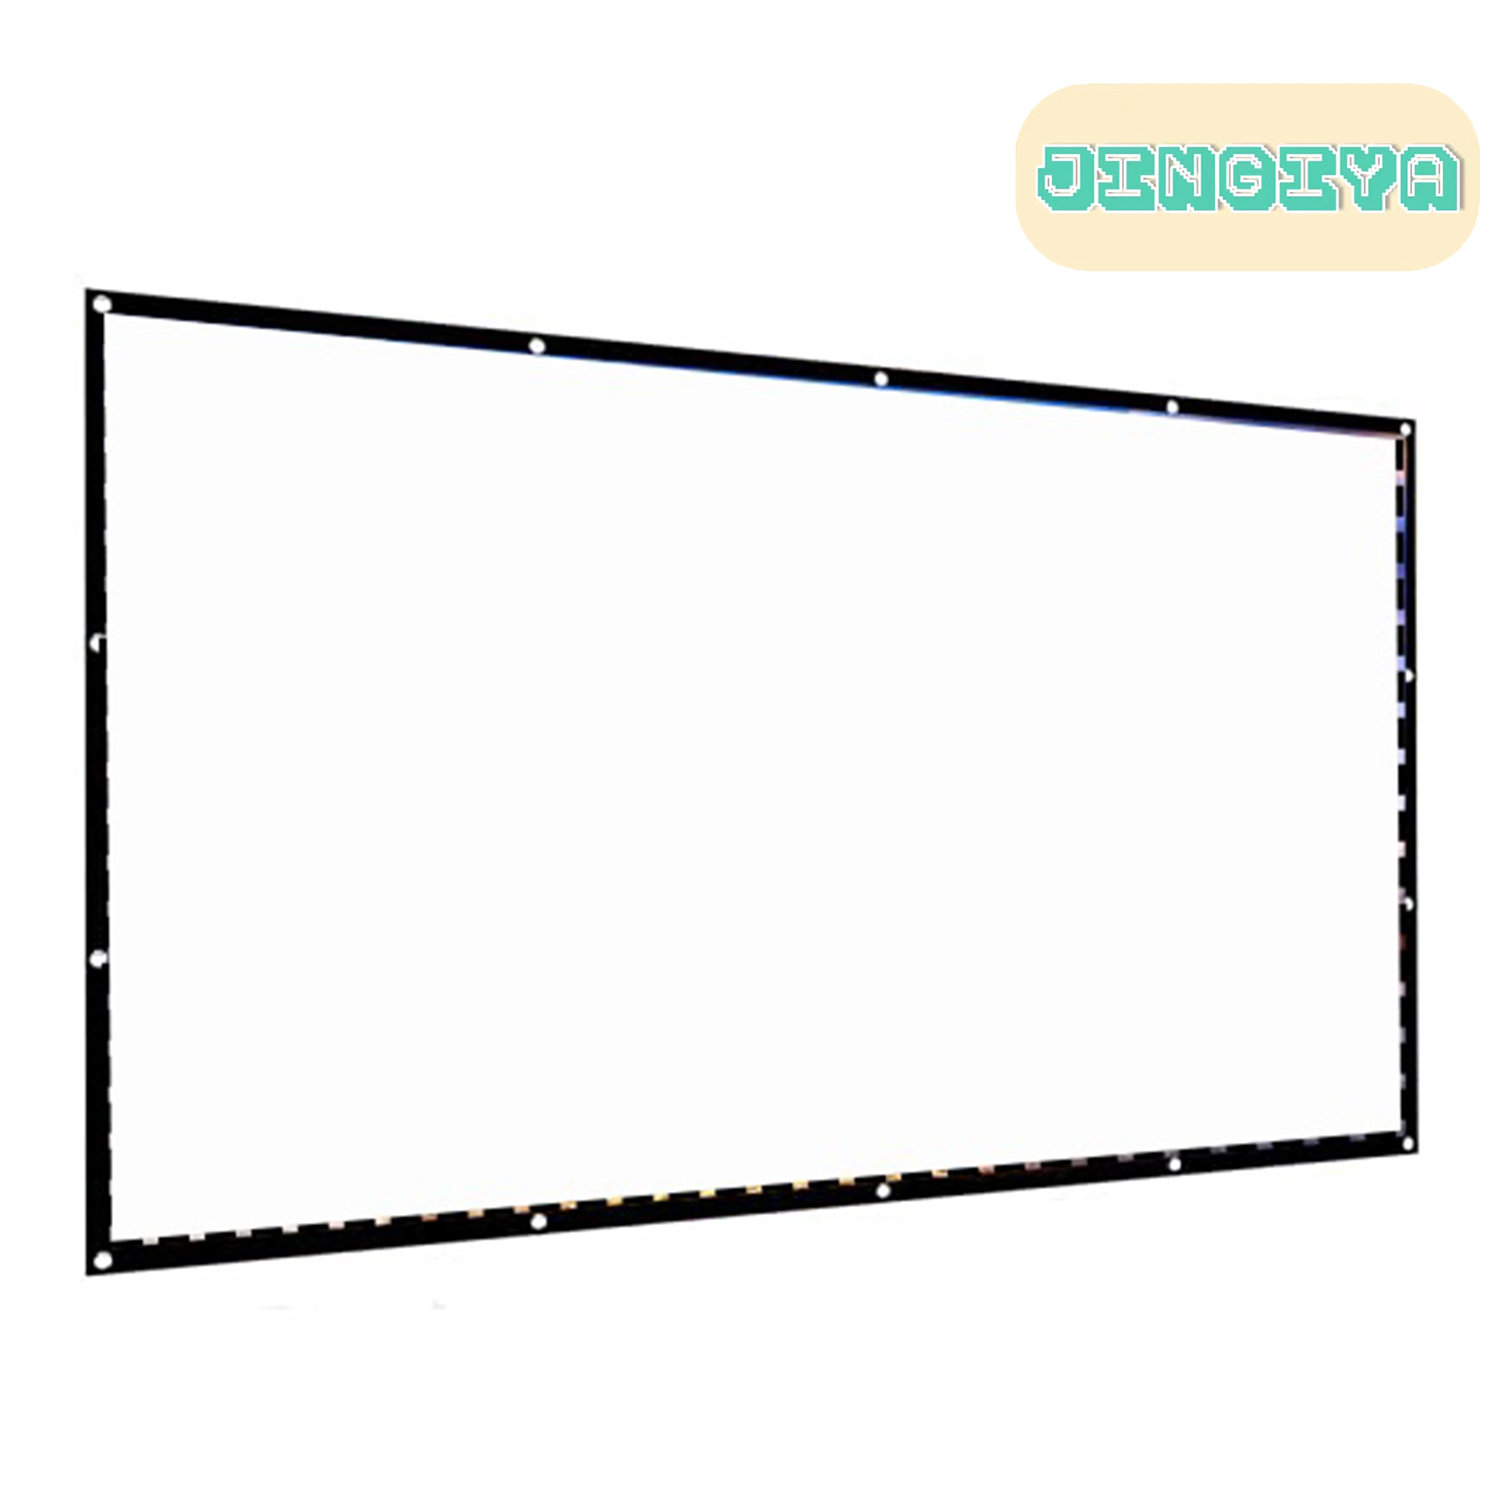 120 inch Projection Screen 16:9 HD Foldable Anti-Crease Portable Projector Movies Screen for Home Theater Outdoor Indoor Support Double Sided Projection 